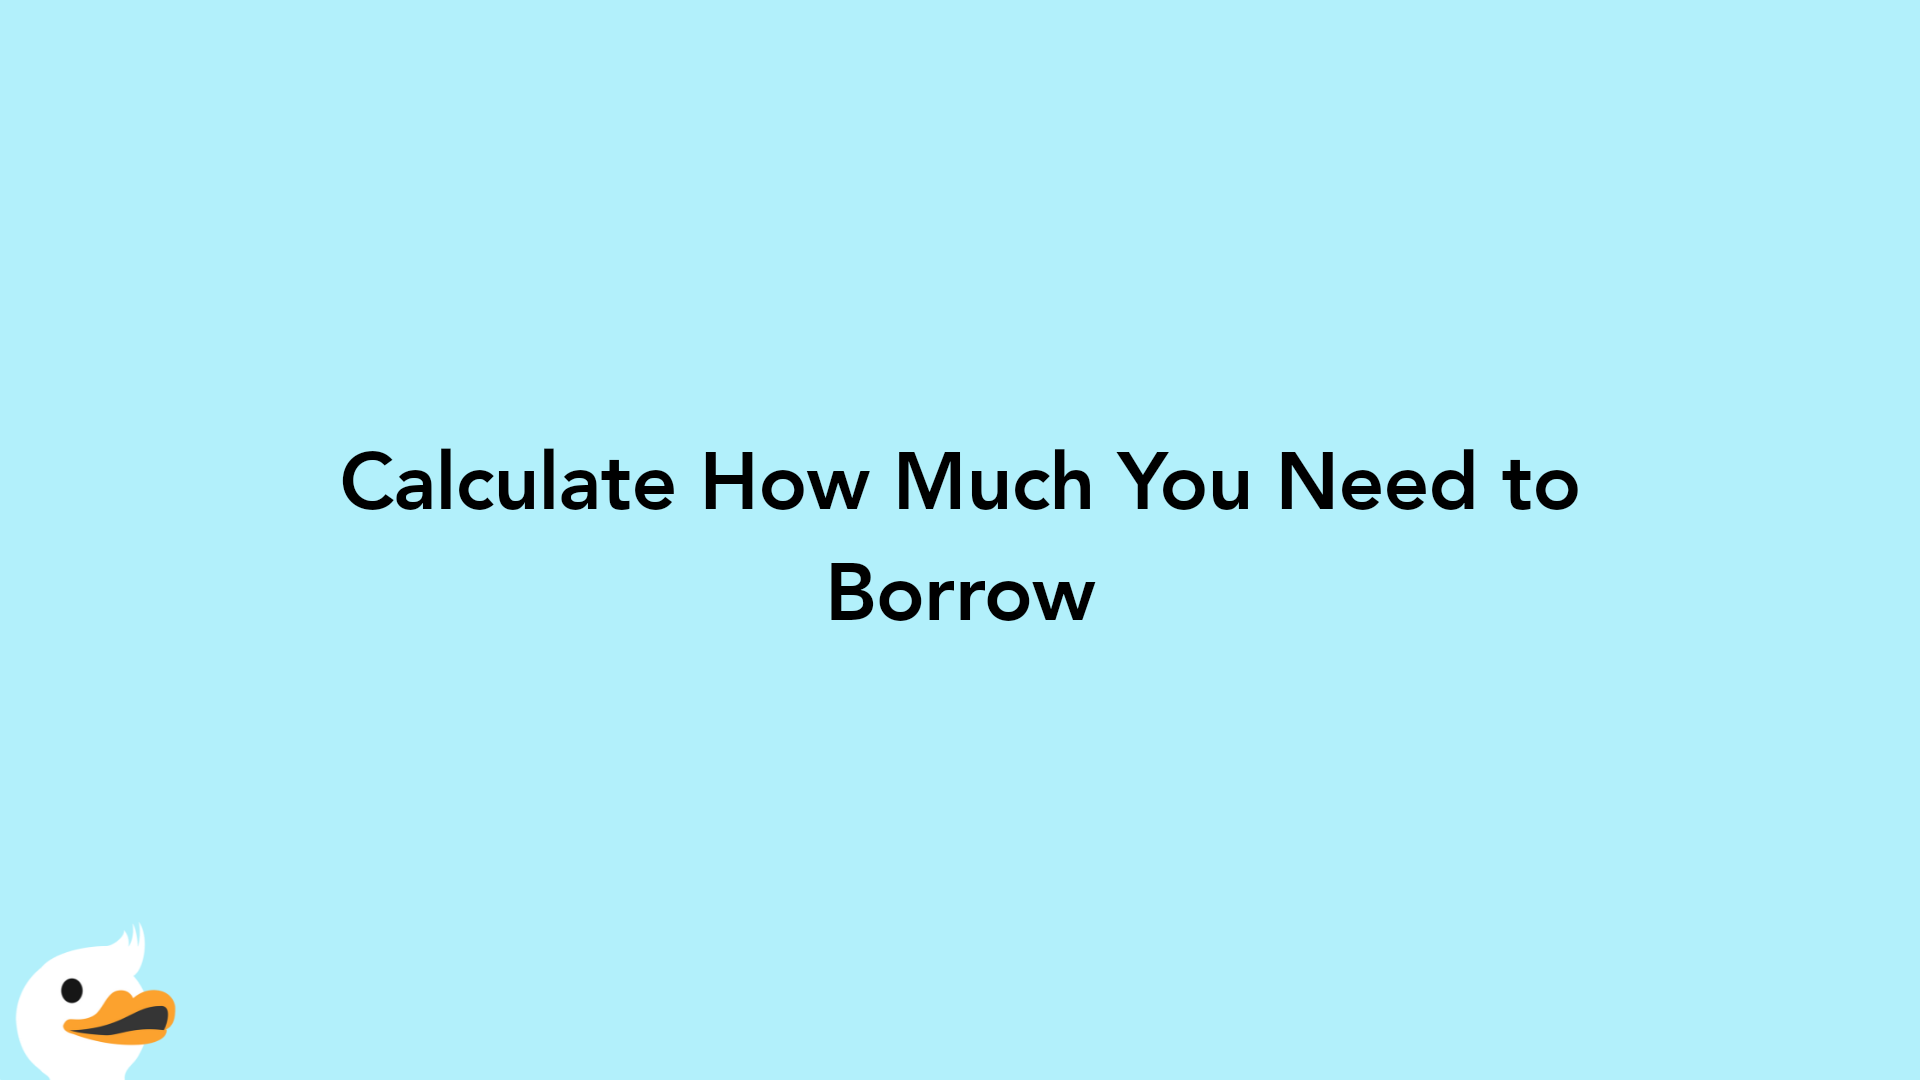 Calculate How Much You Need to Borrow